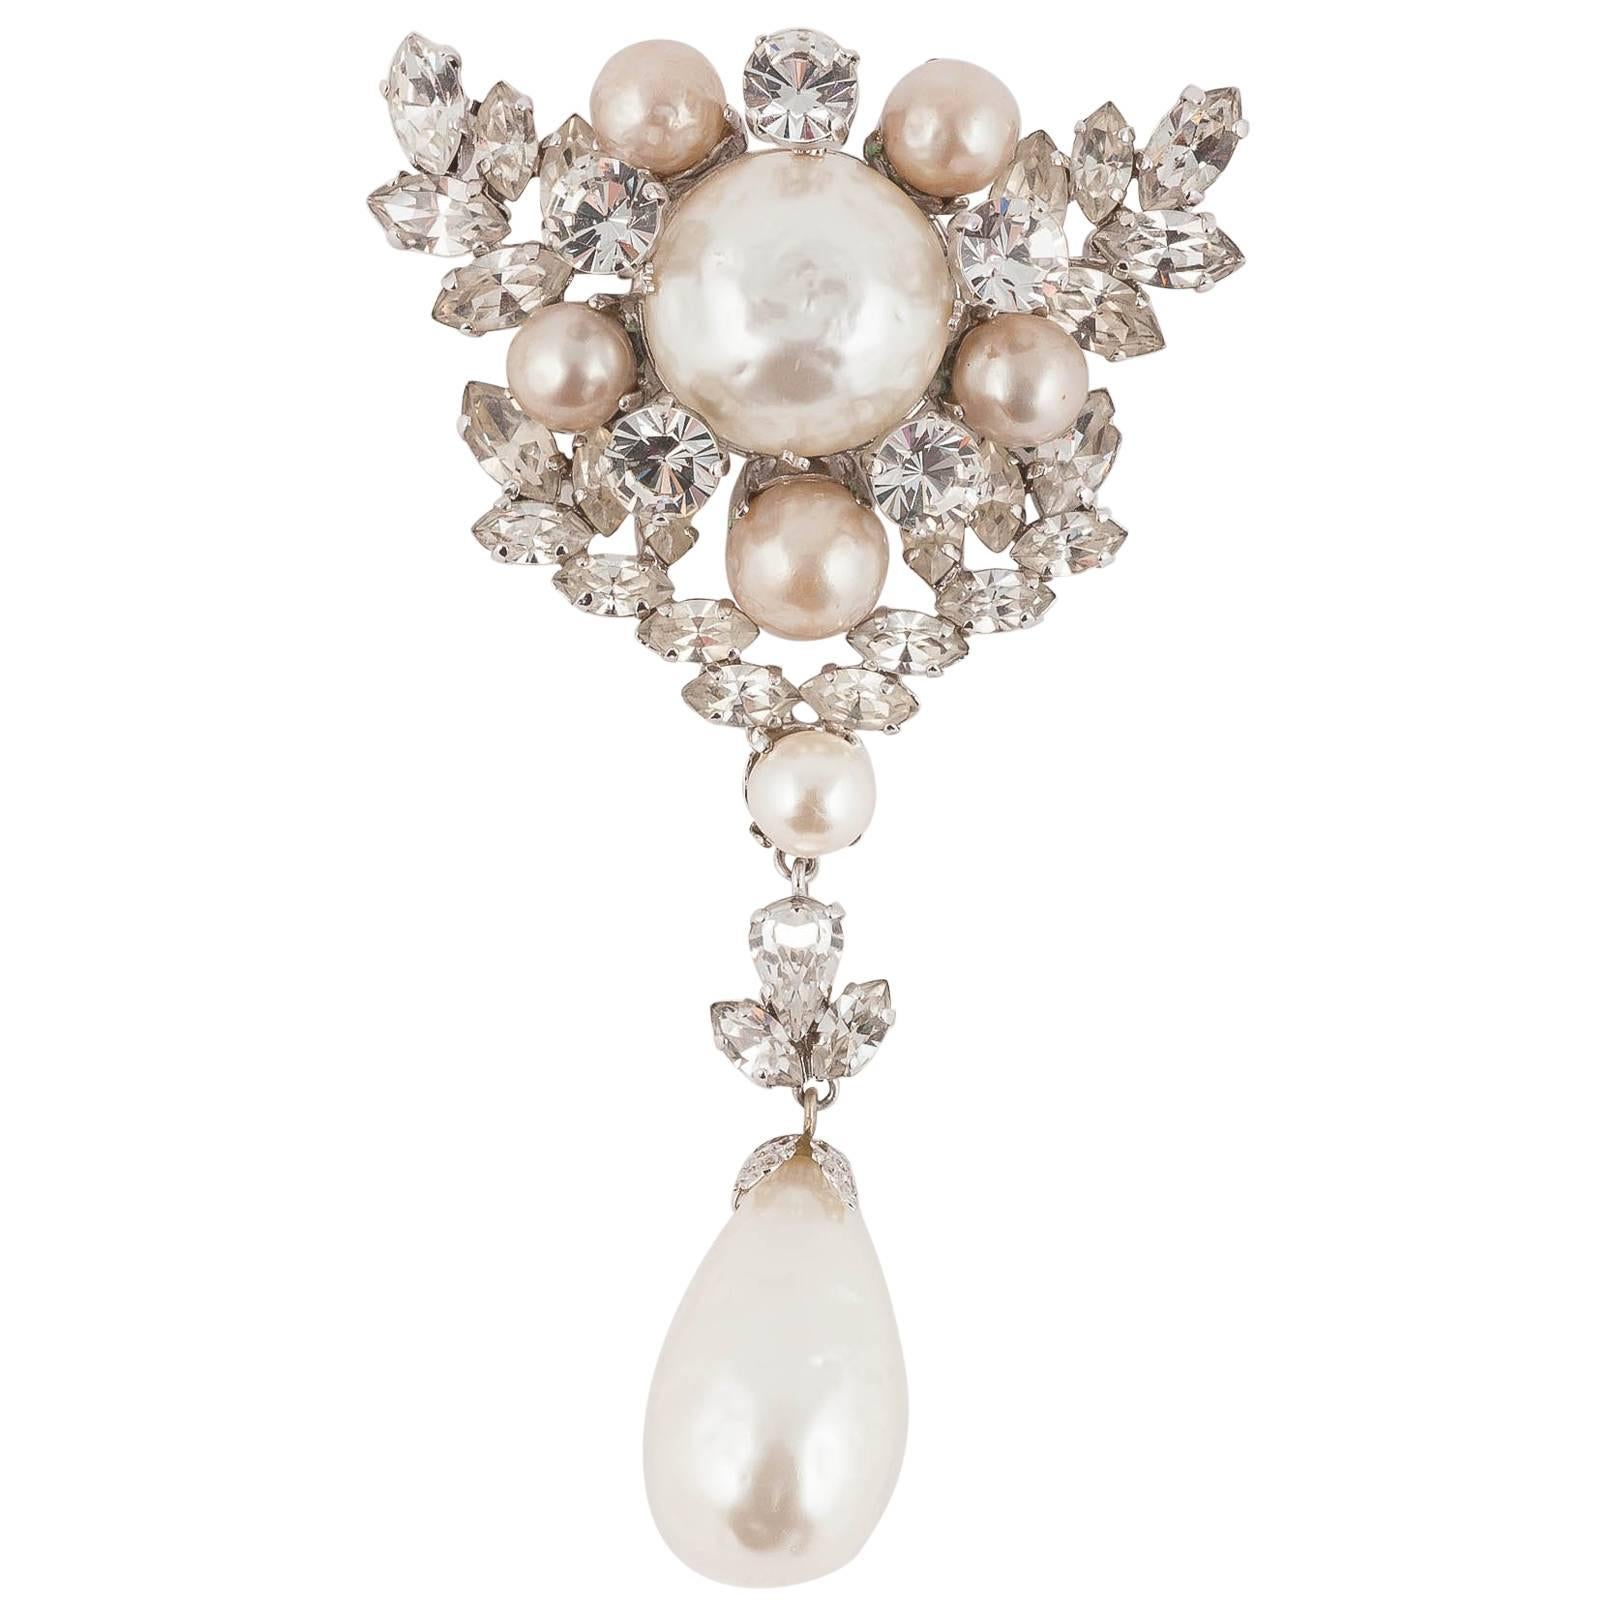 Christian Dior baroque pearl and clear paste brooch, dated 1961